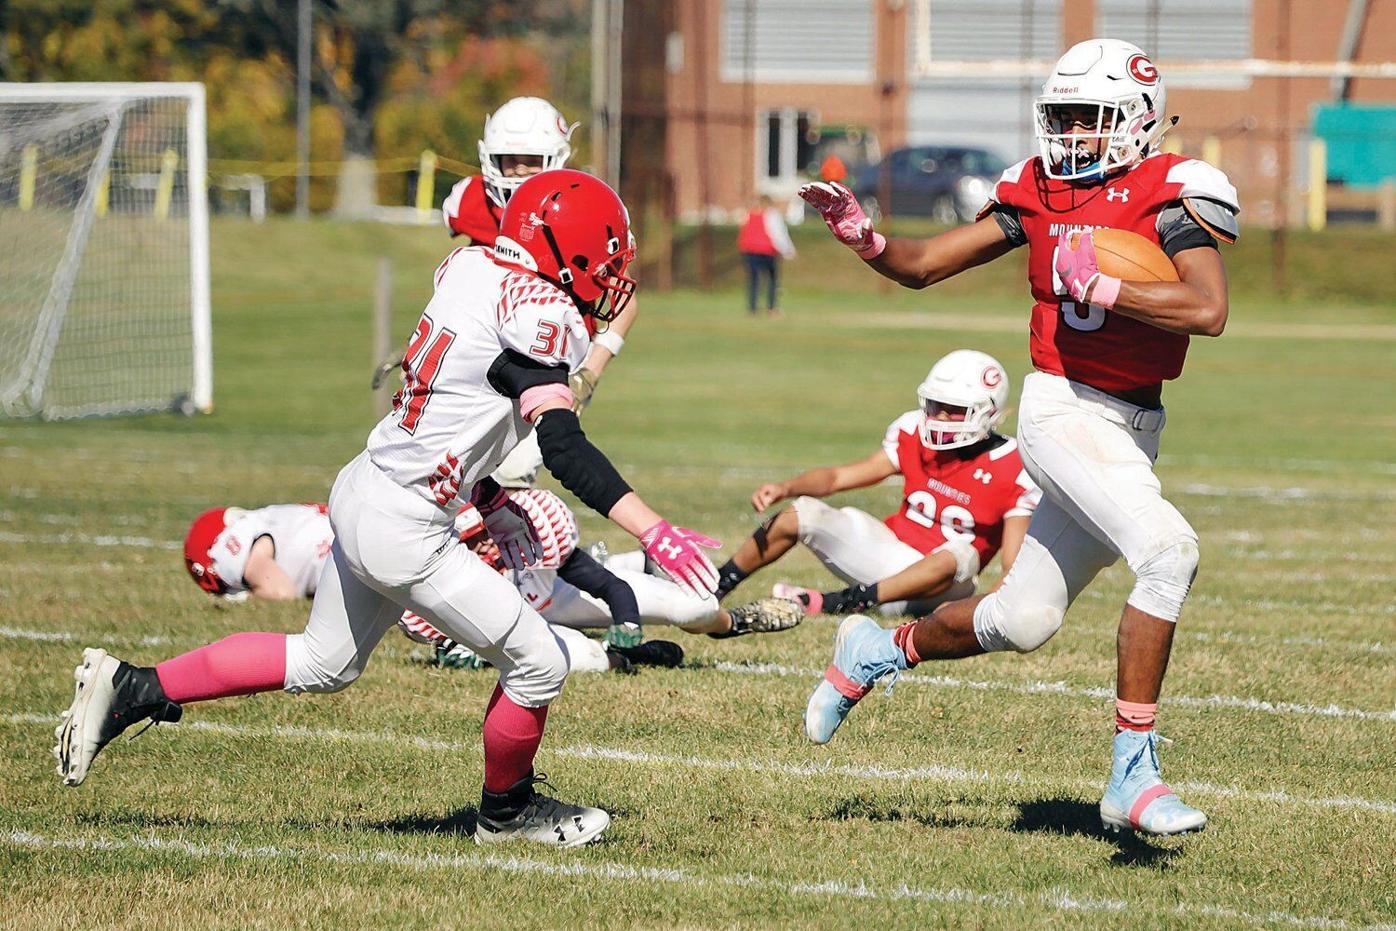 Drury football co-op, playing in Mount Greylock uniforms, rolls to win over Athol